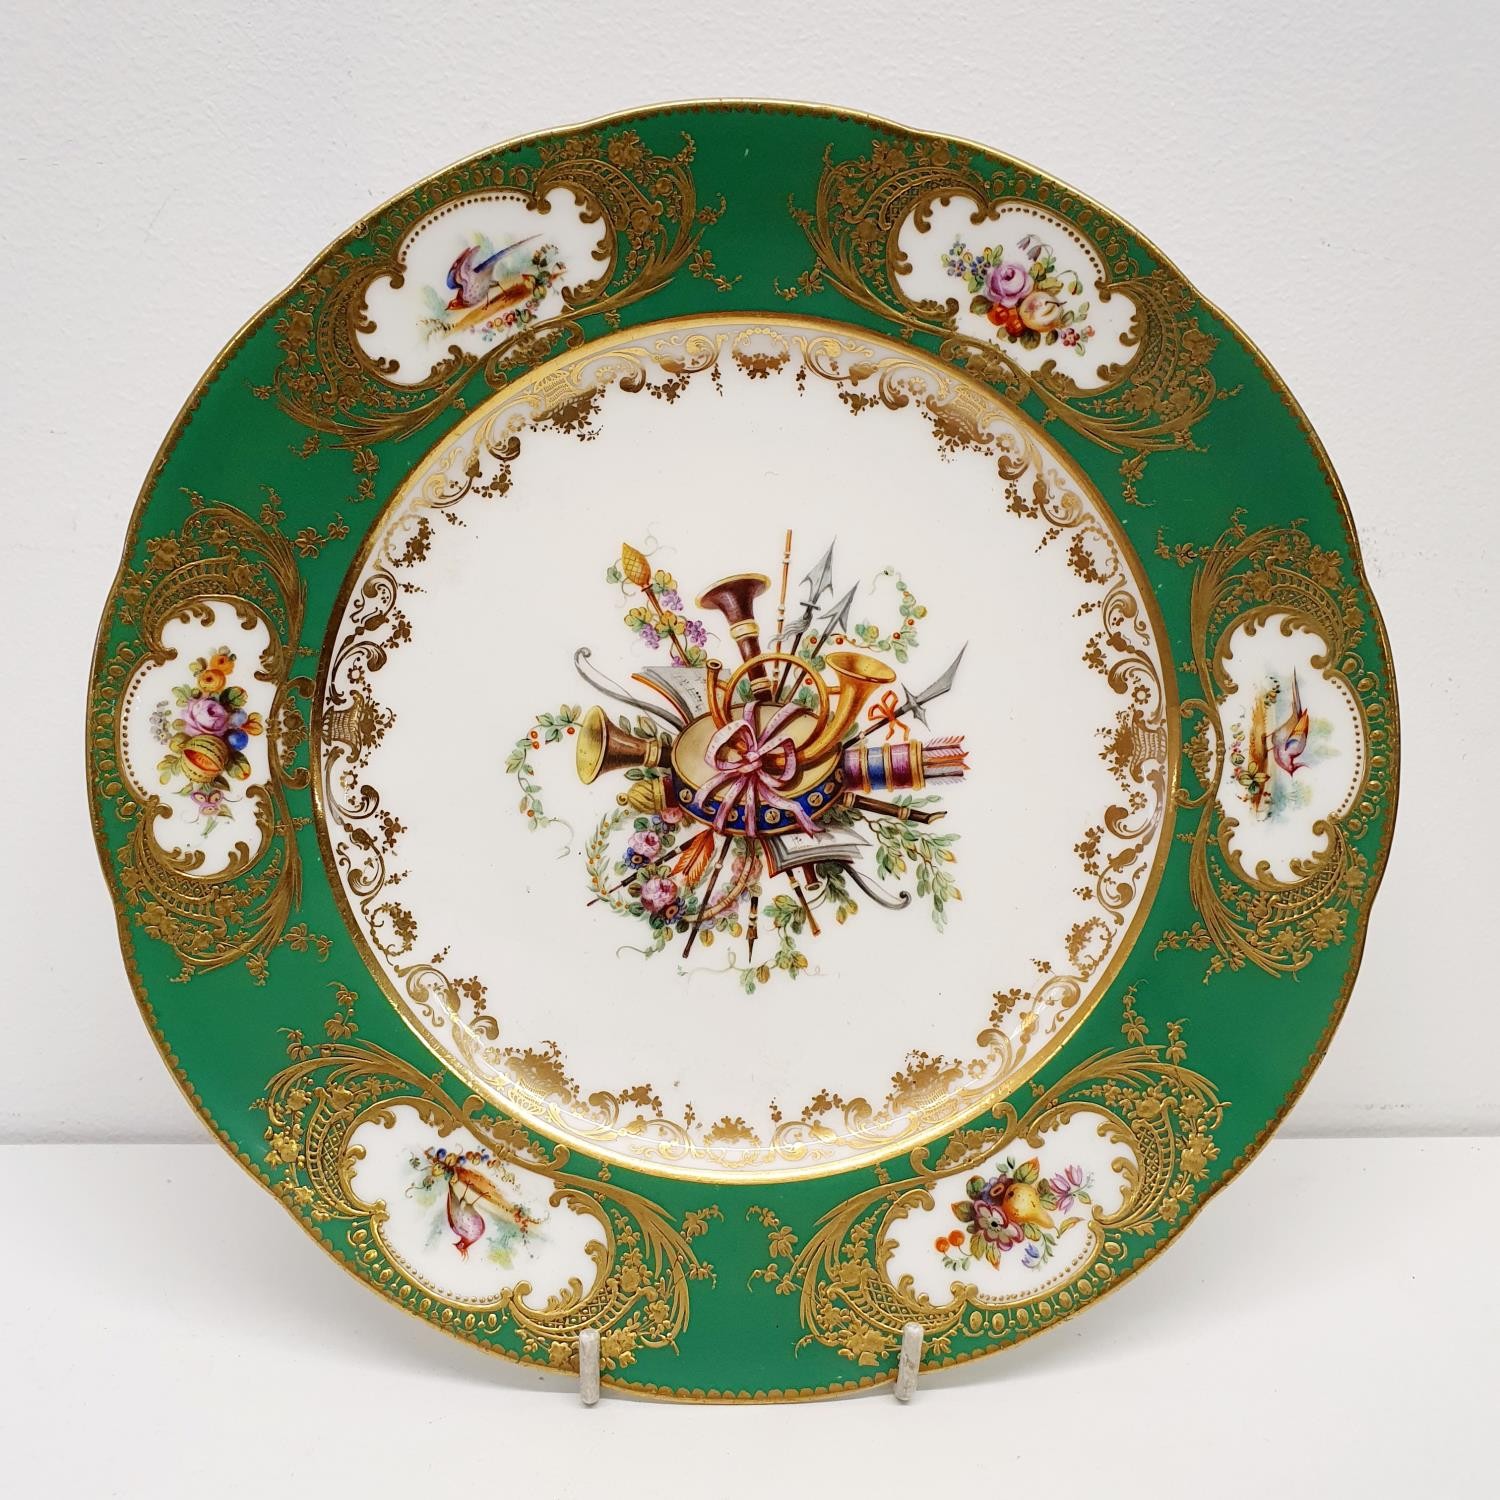 A Sevres style plate, decorated musical instruments and foliage, within a green and gilt border,